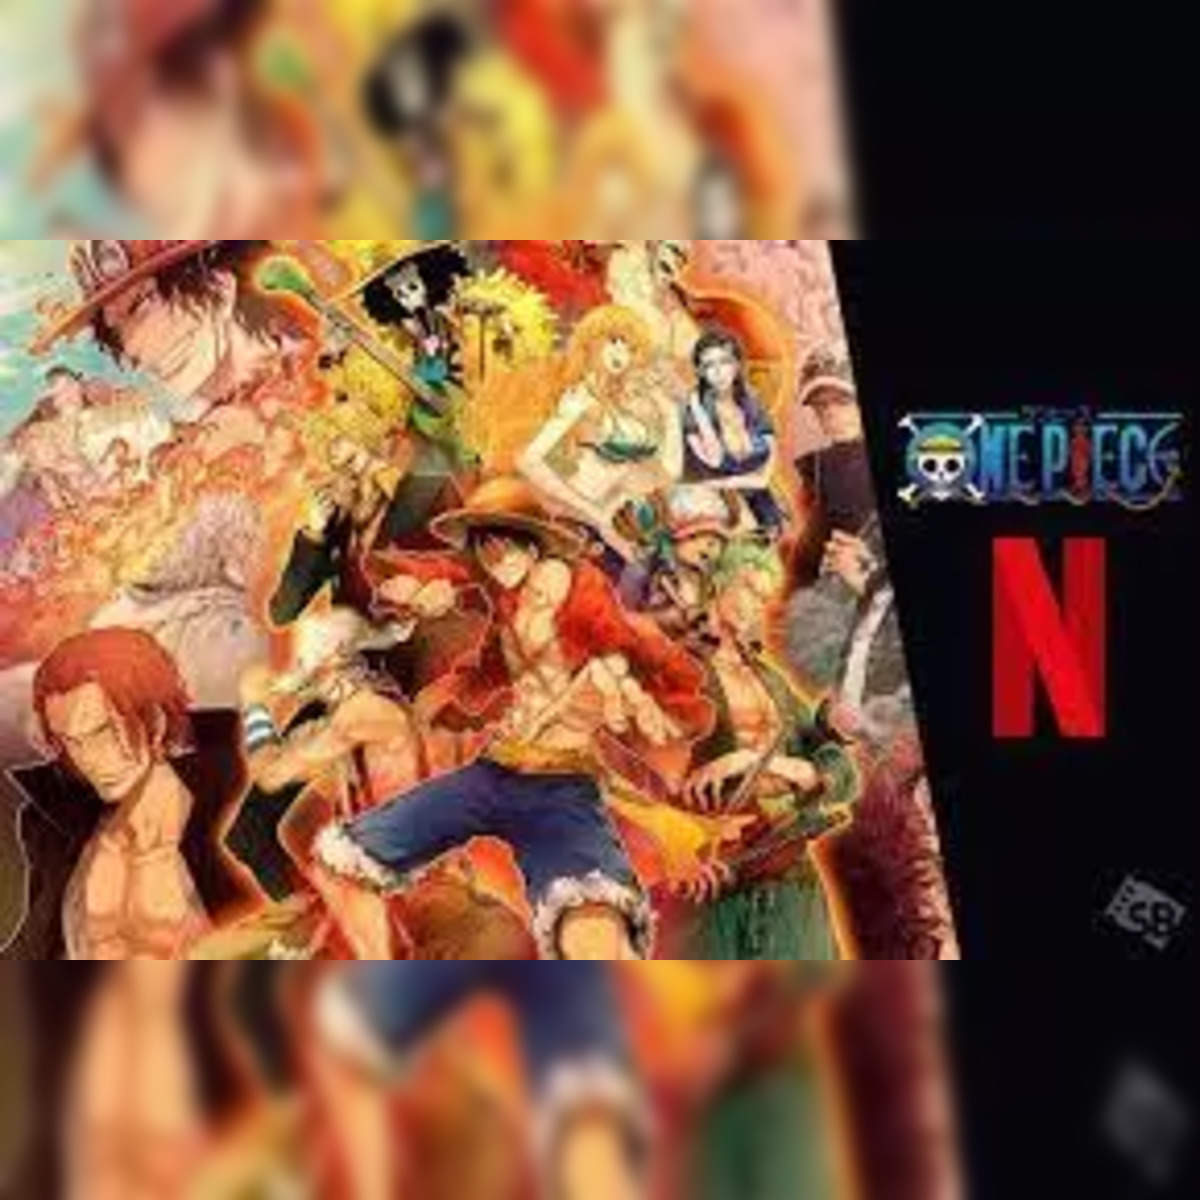 One Piece Episodes: 'One Piece': How many episodes are available on  Netflix? Check all details here - The Economic Times